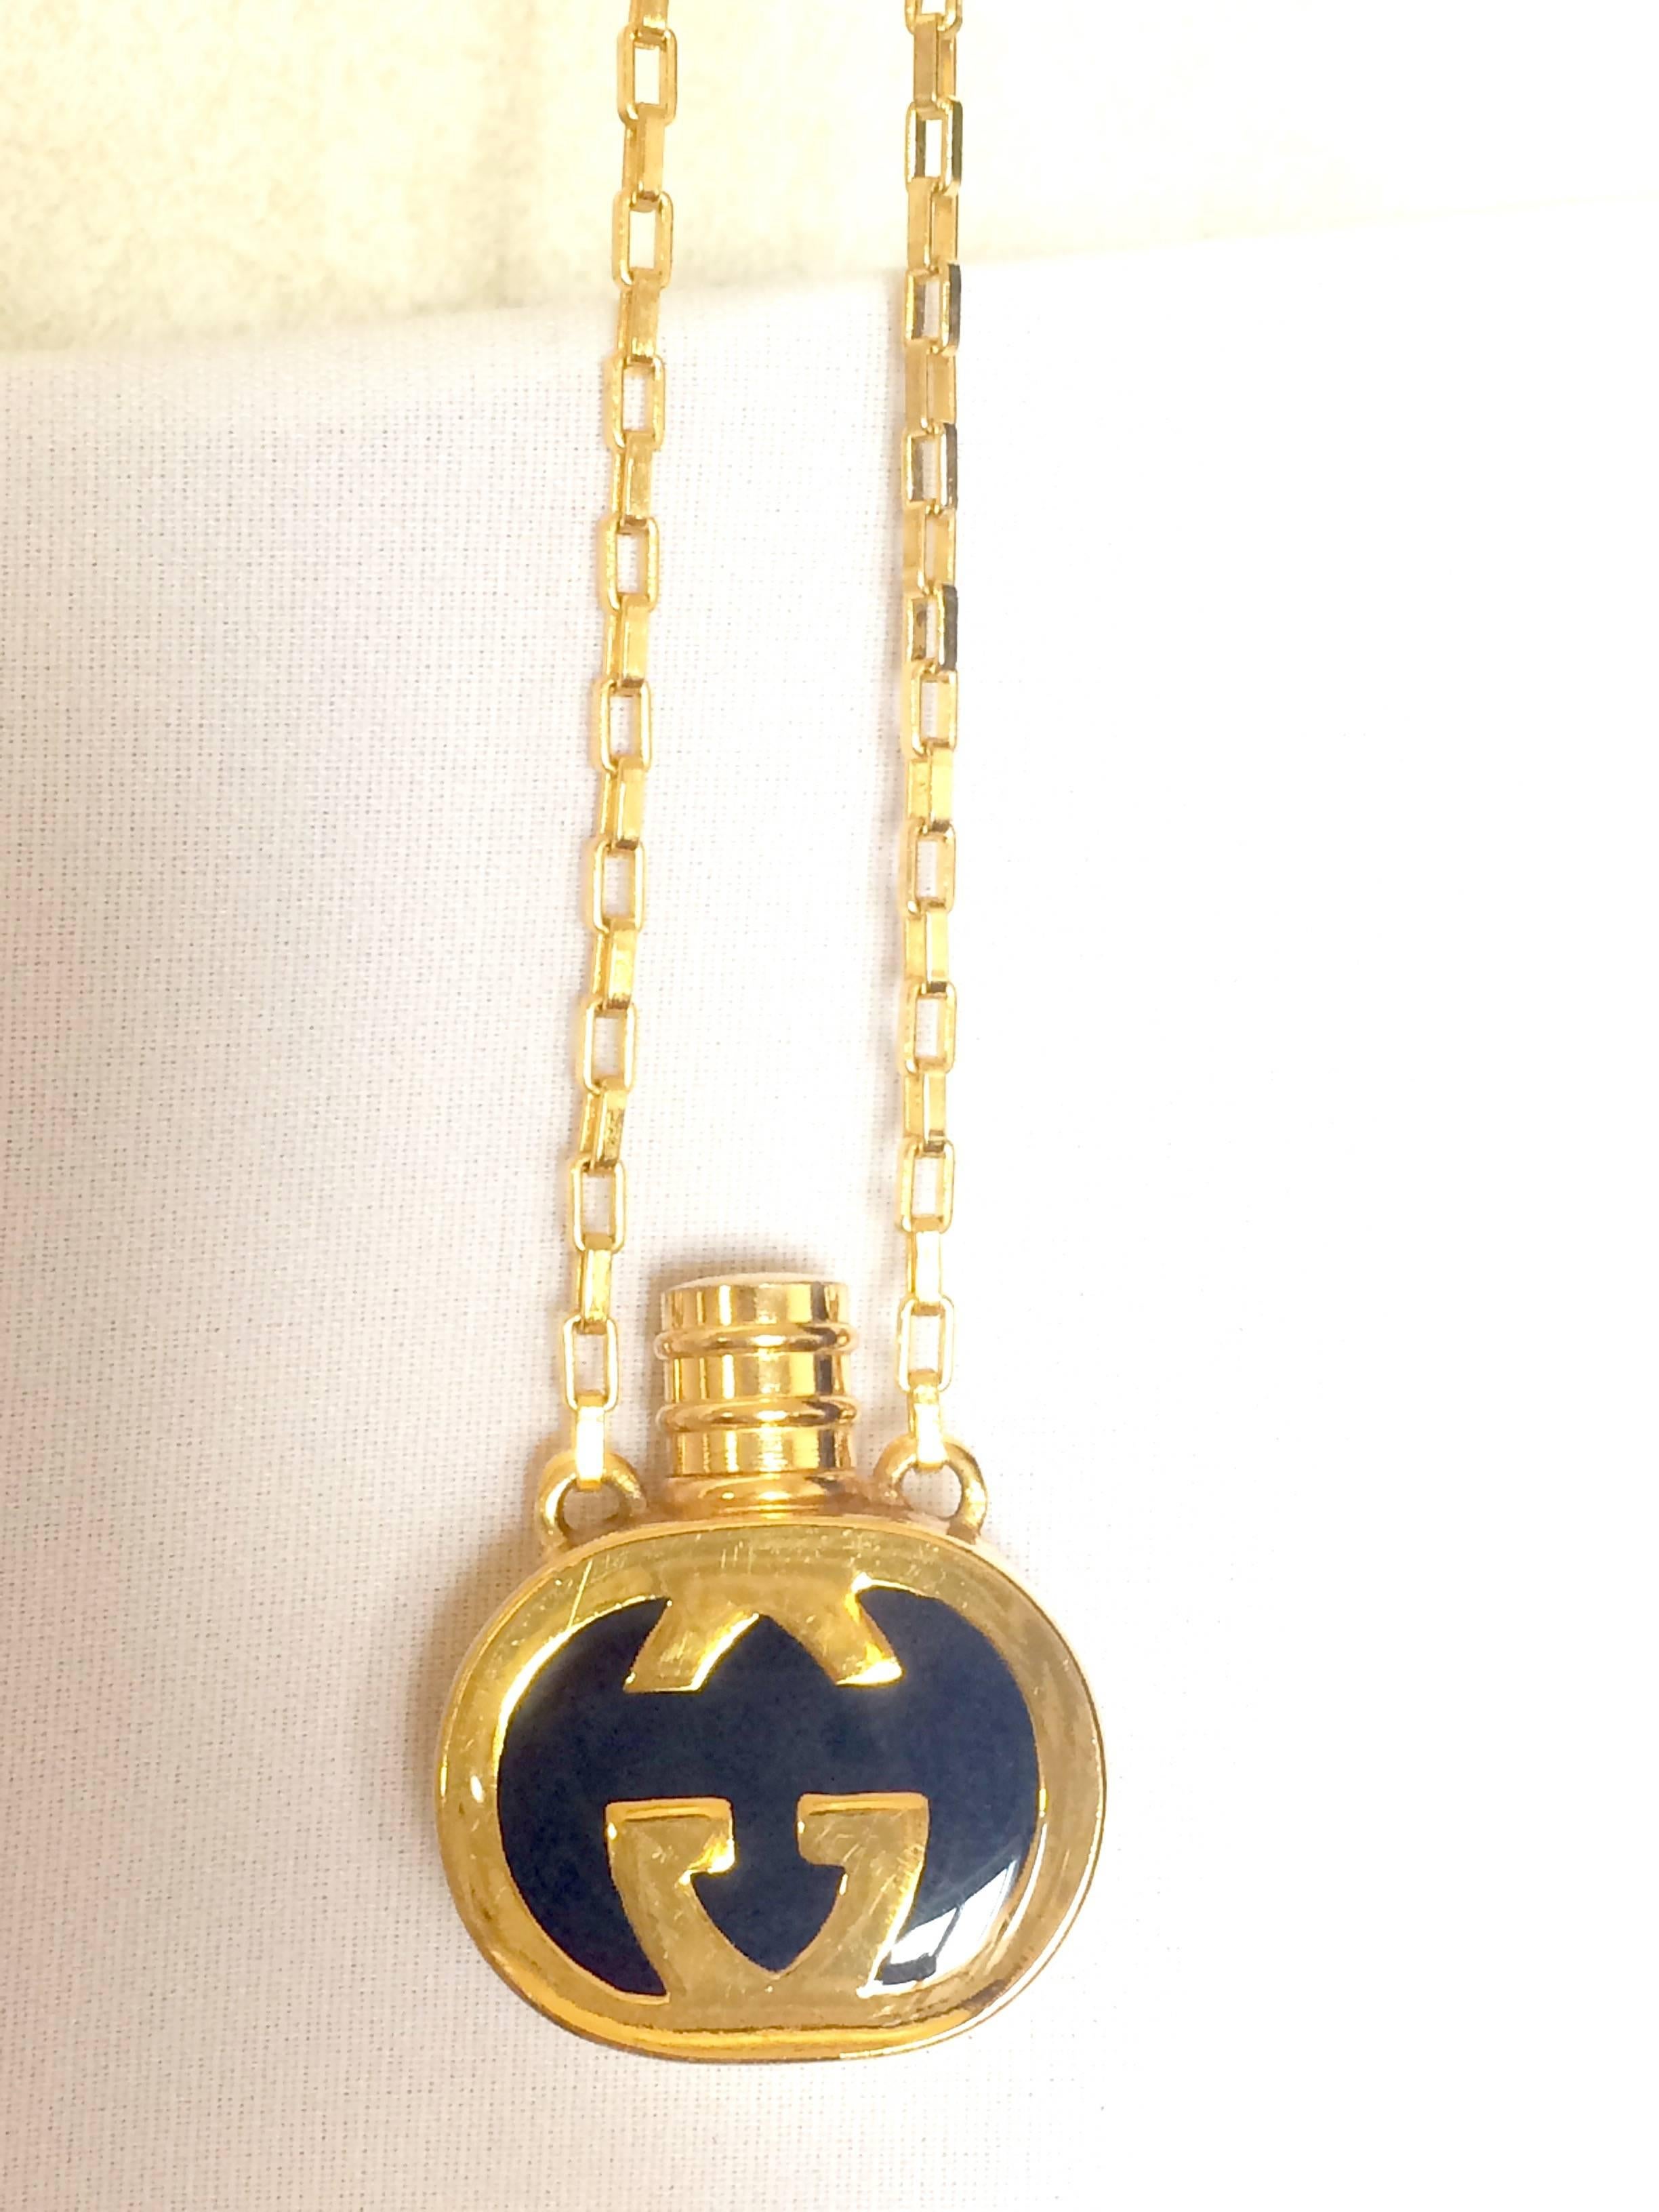 Vintage Gucci gold and navy round shape perfume bottle necklace with logo mark. 1